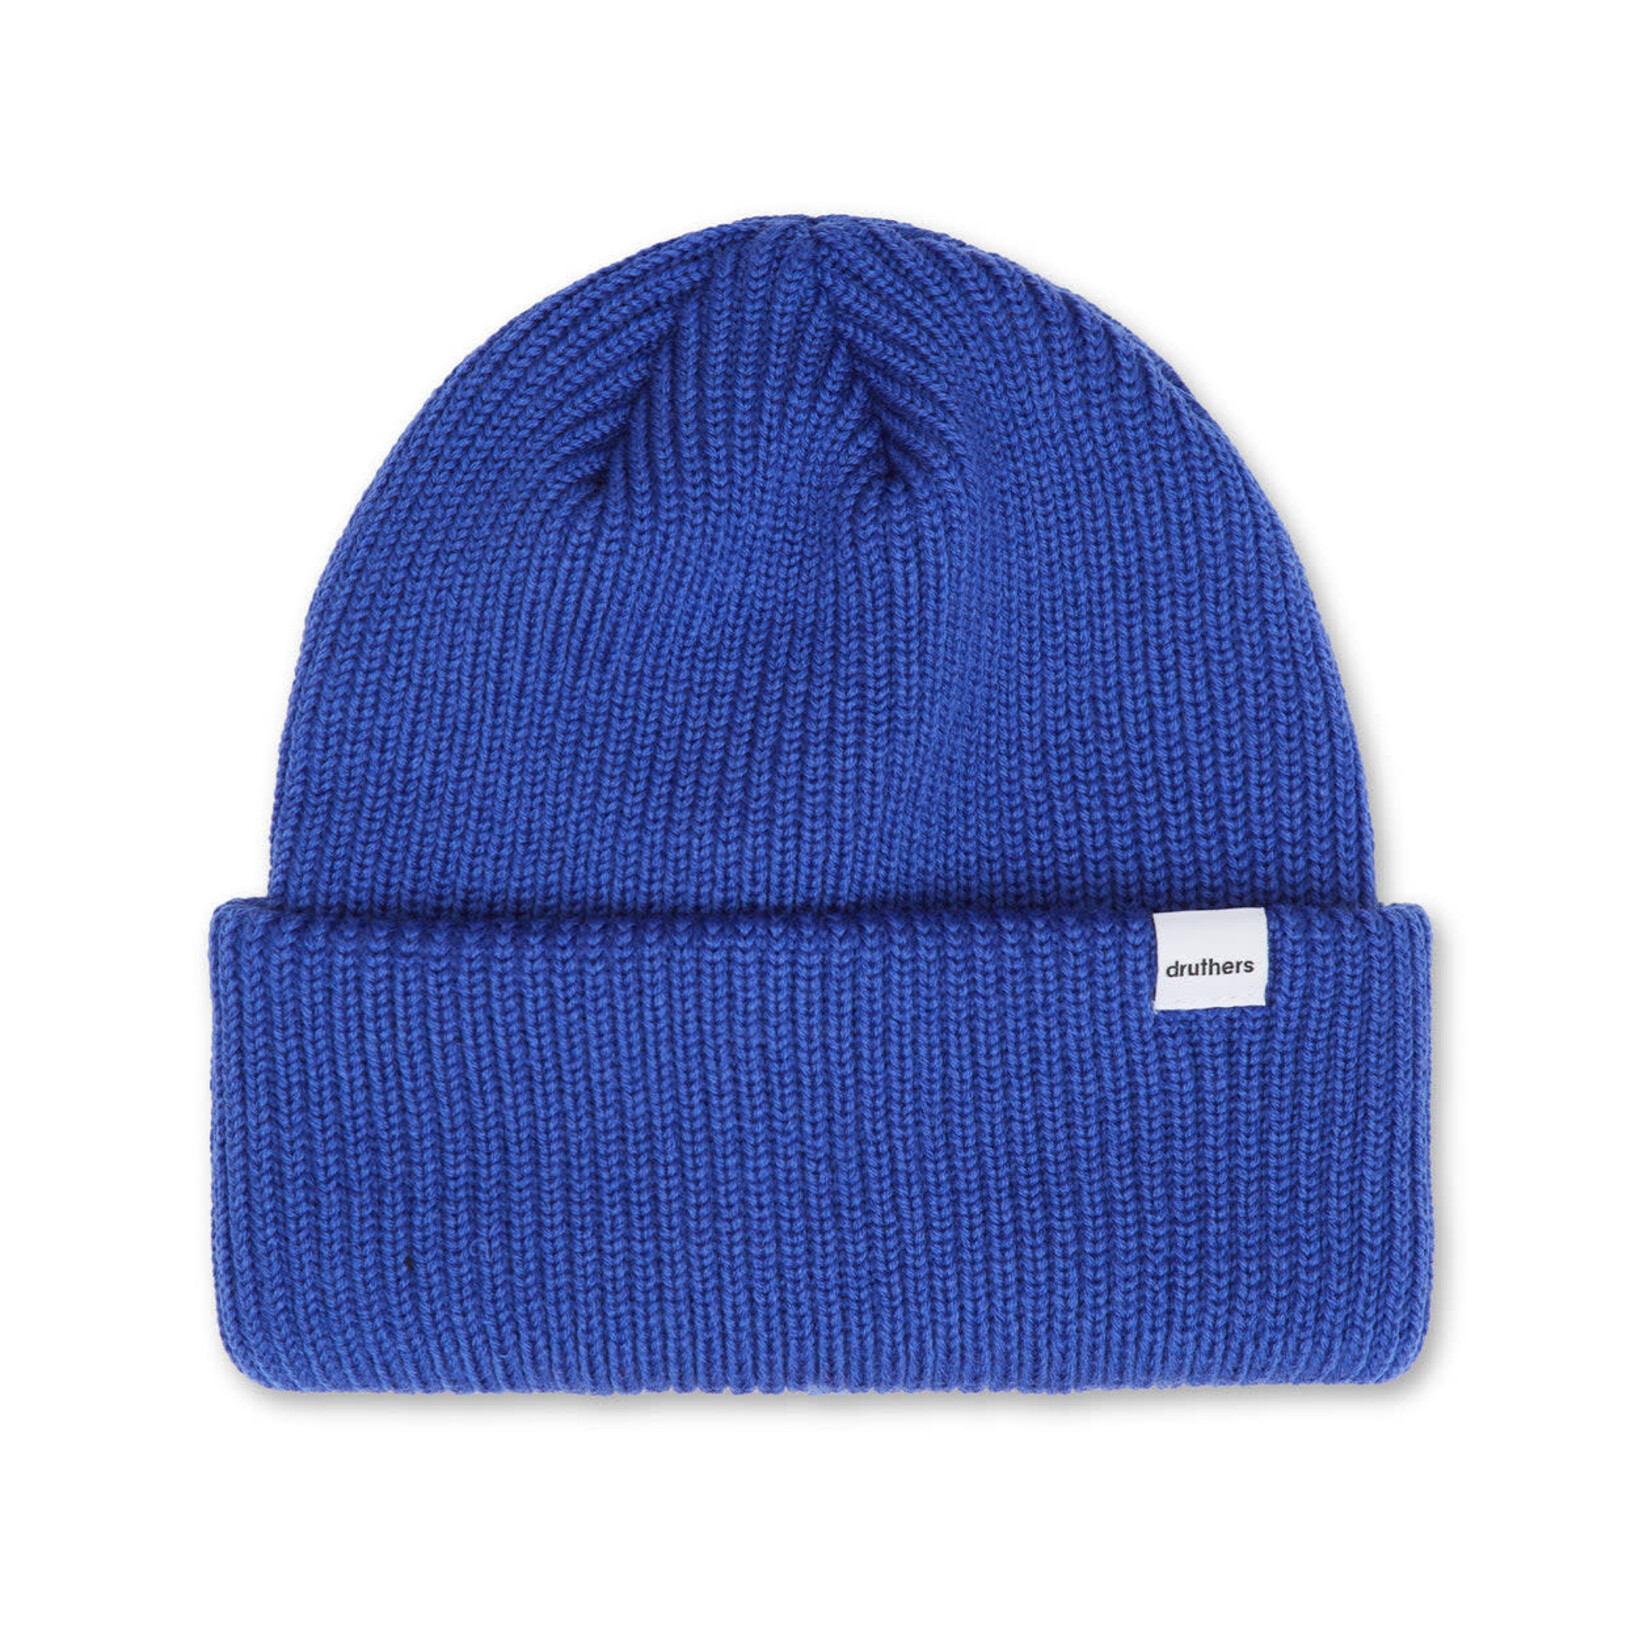 Druthers NYC Druthers Organic Cotton Waffle Knit Beanie Blue